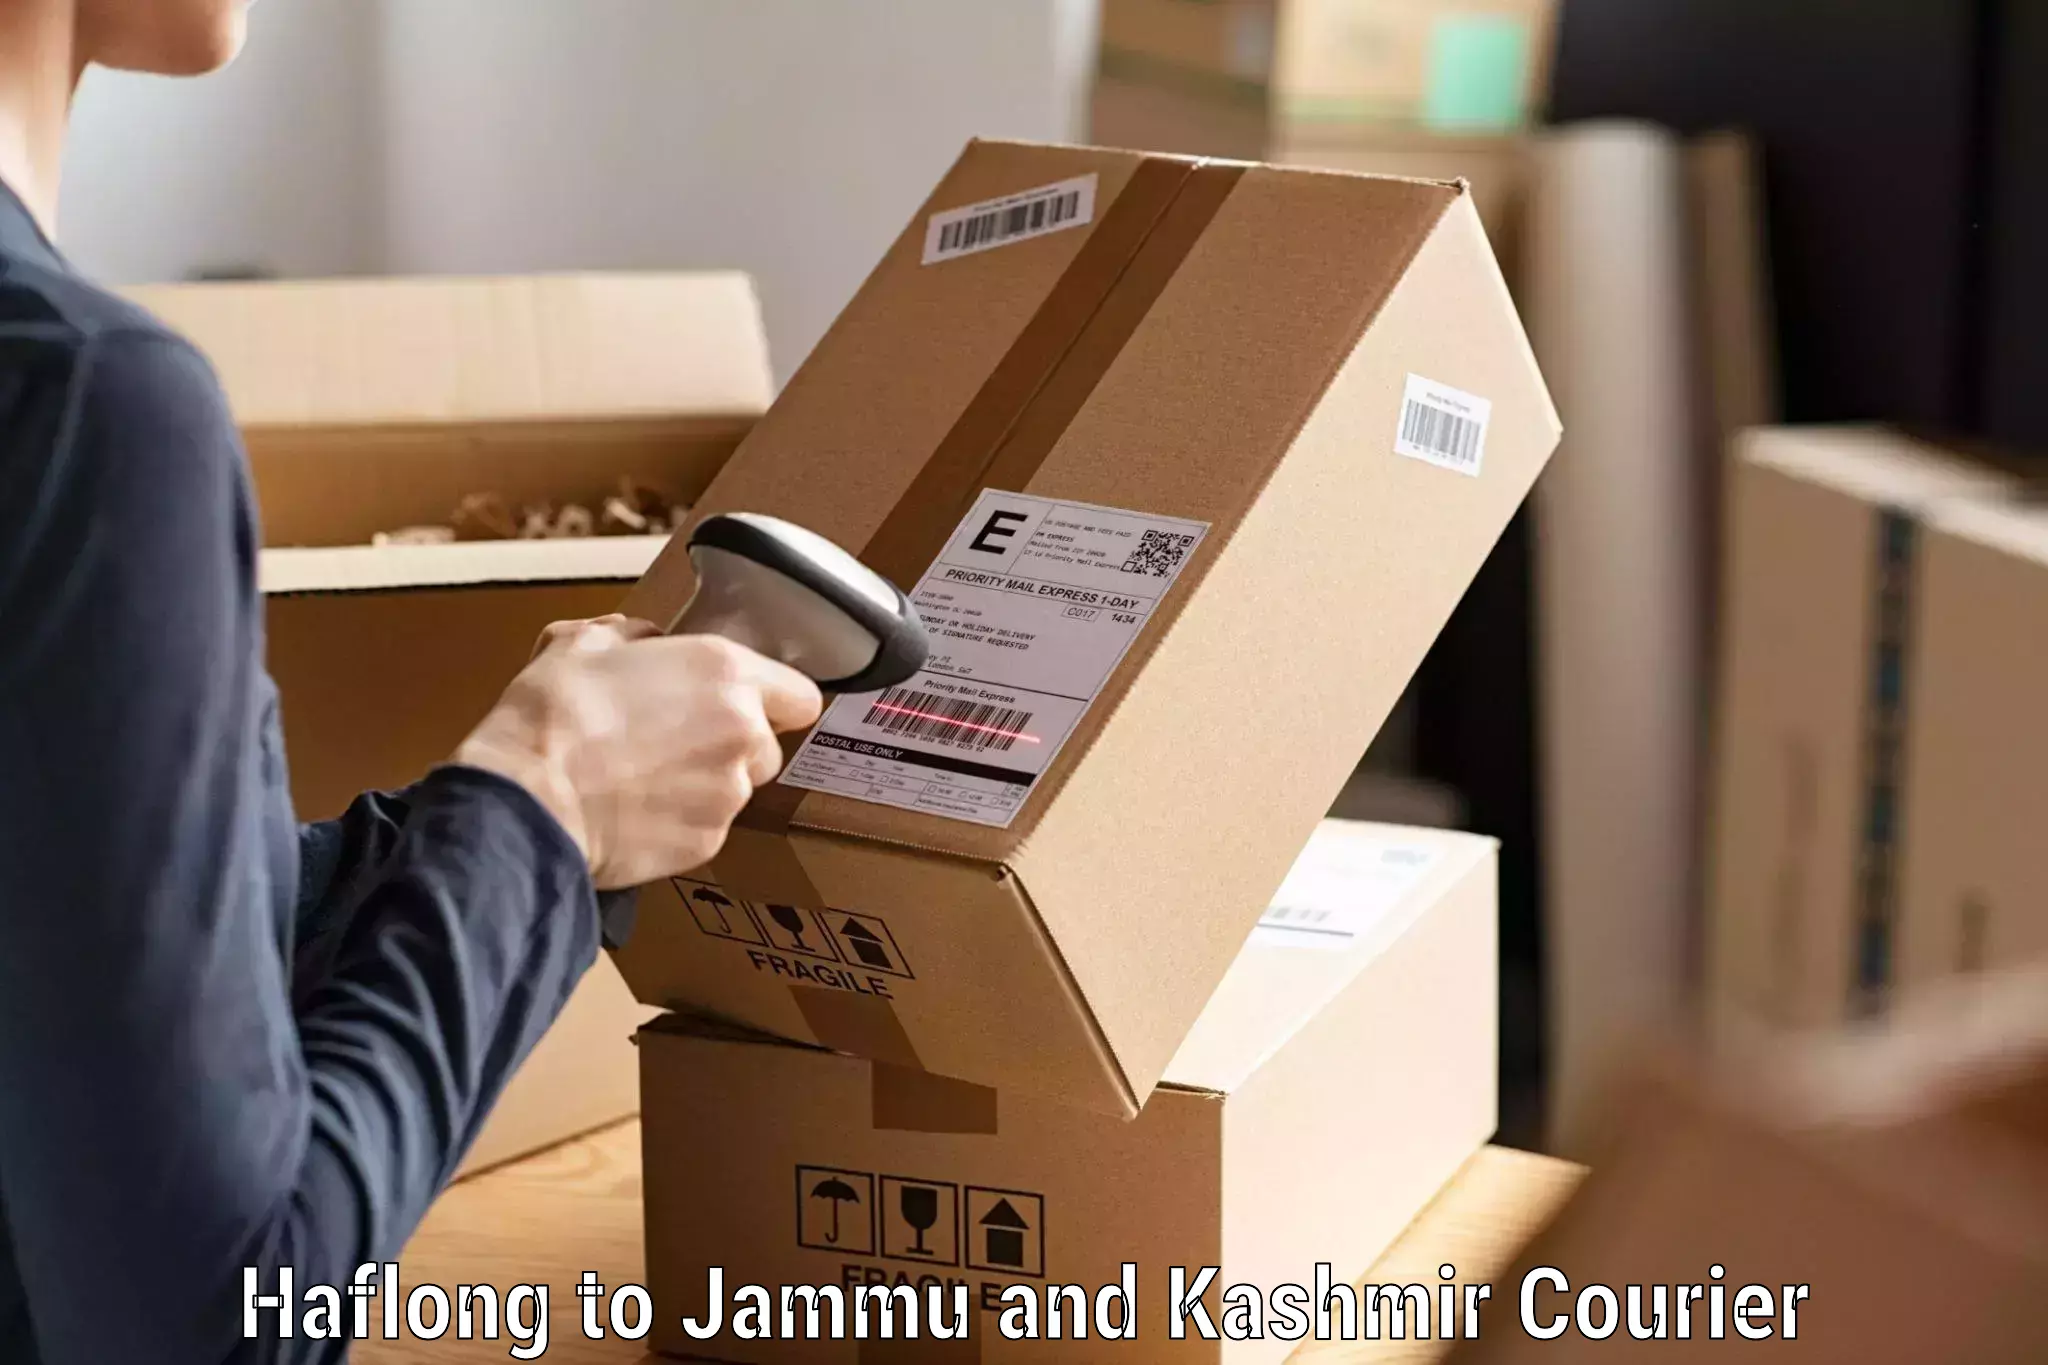 Professional courier handling Haflong to Pulwama